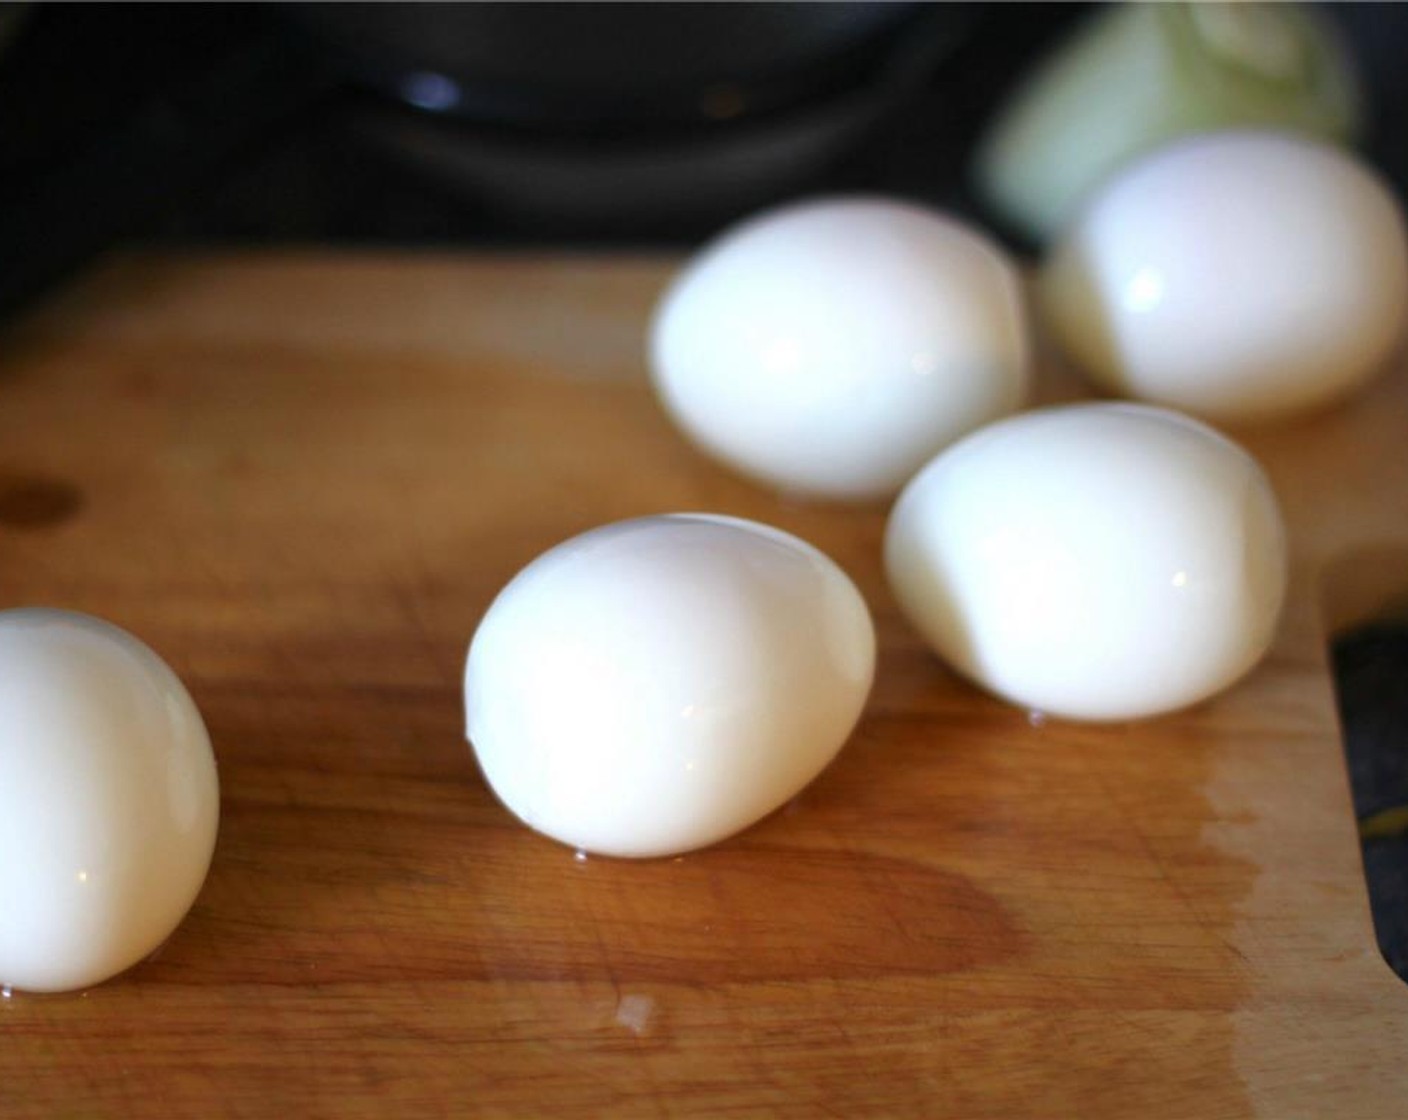 step 1 Boil water in a medium pot, add the Eggs (4) and boil for 8 minutes until hard boiled. Then cool the eggs under cold water and set in the fridge to cool completely.